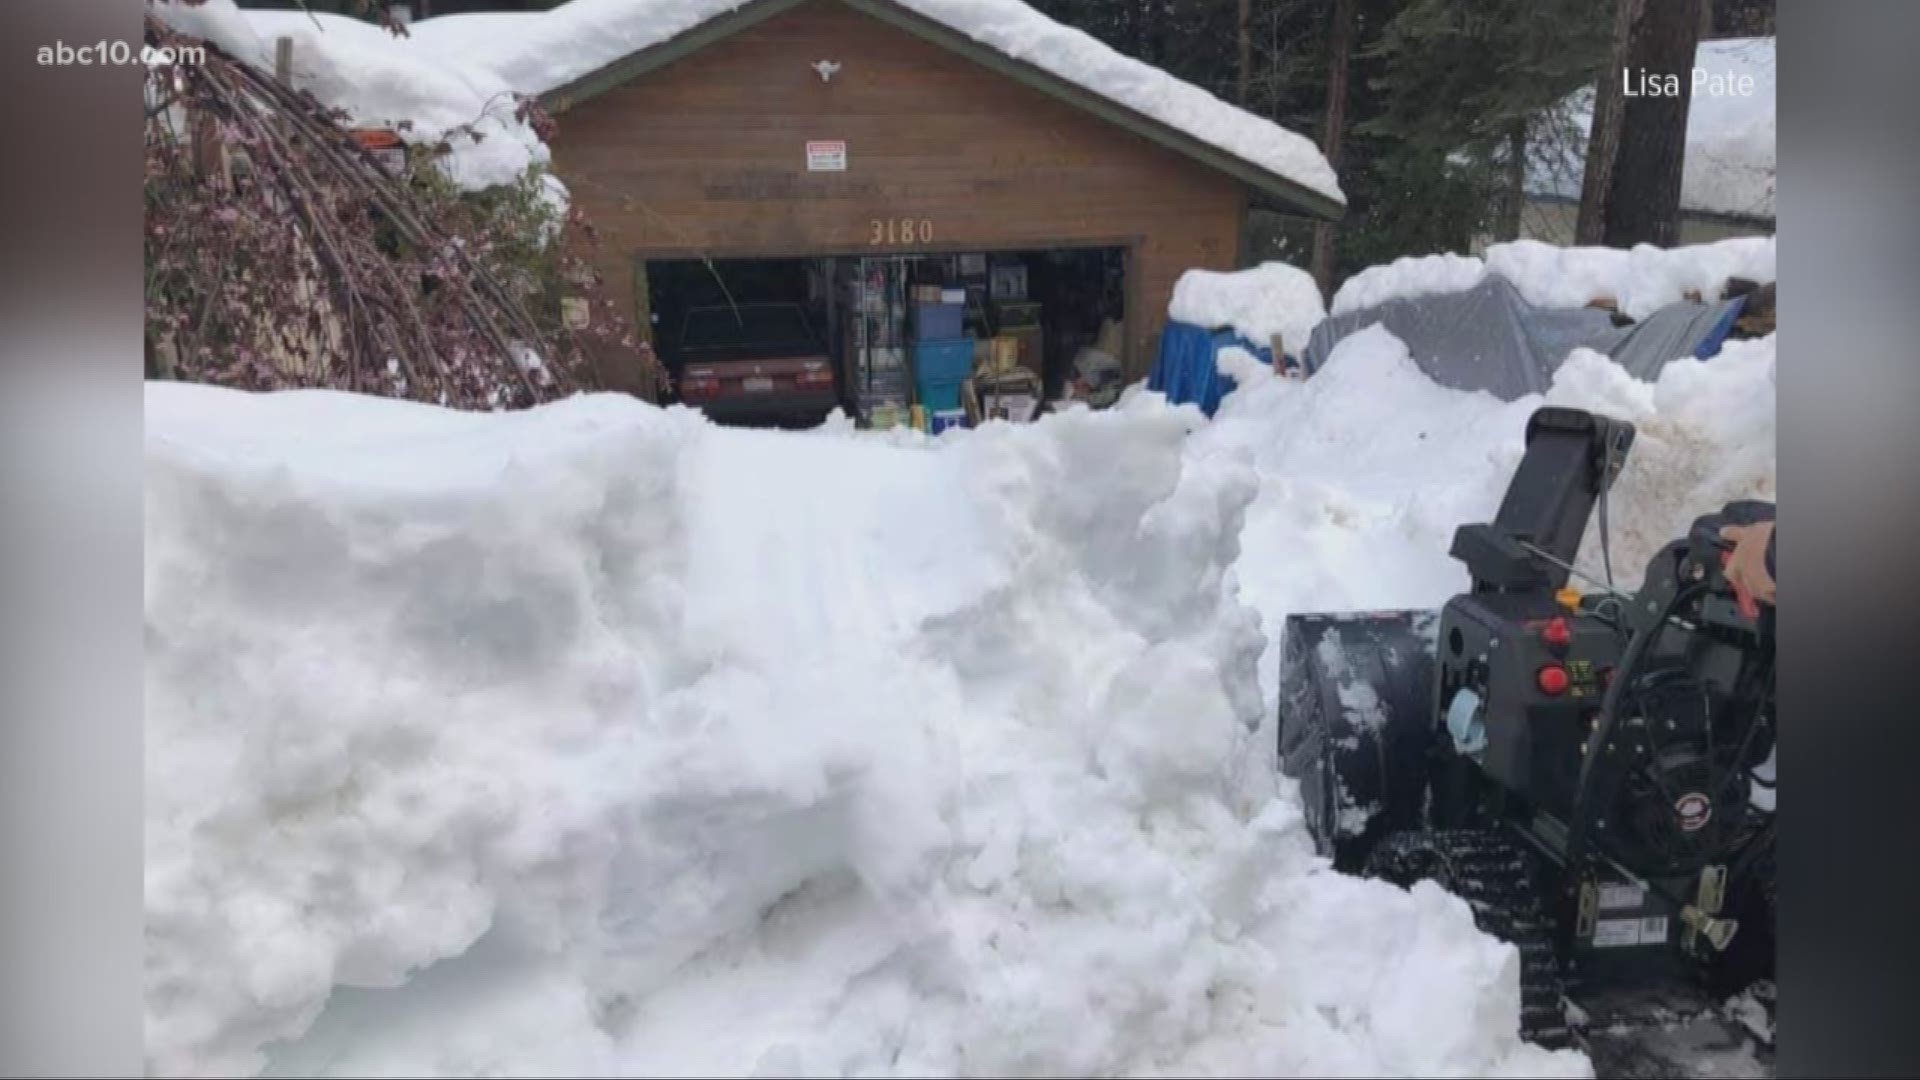 Around 3 feet of snow buried Pollock Pines last week and it trapped many of the retired population in the community. Kirt Key and his son helped shovel them out